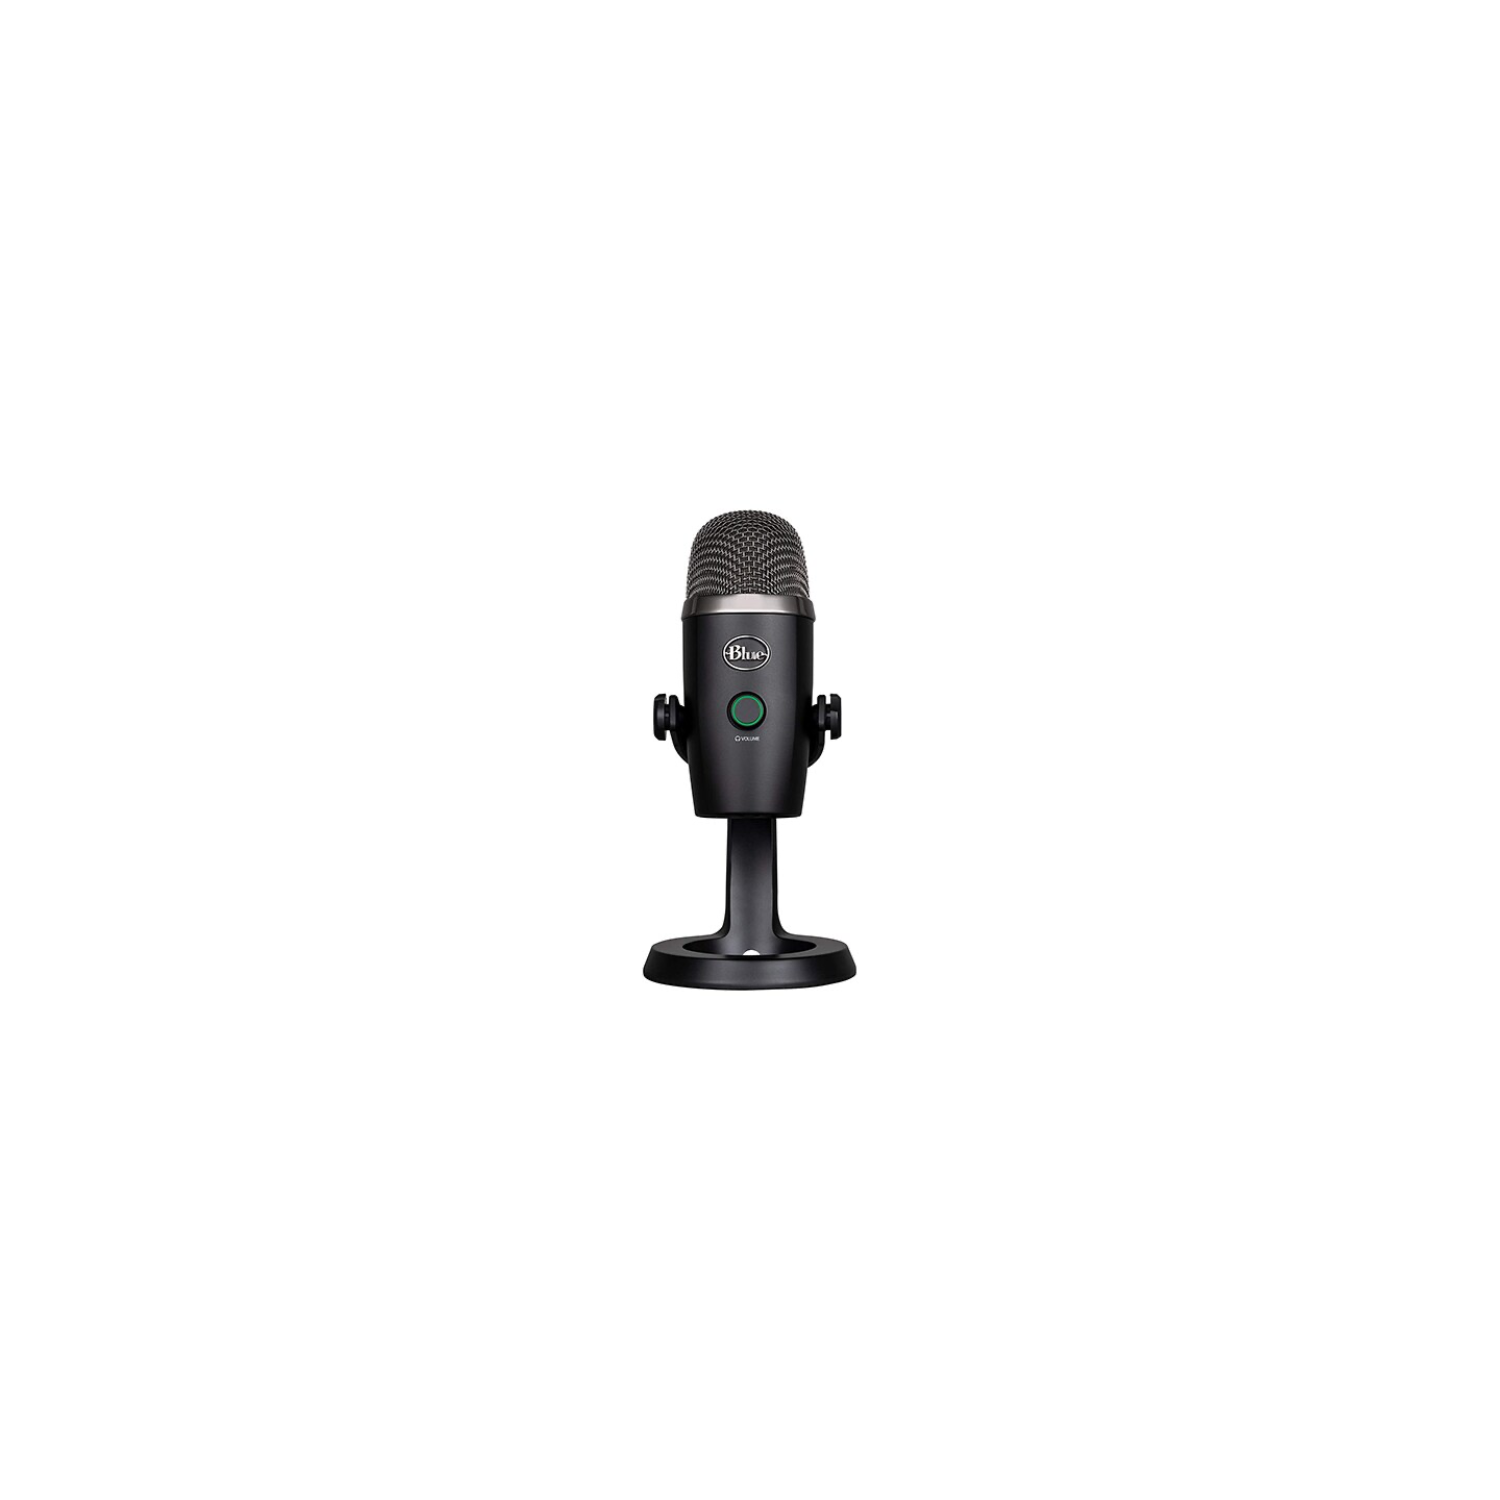 Logitech Blue Yeti Nano USB Premium Microphone for podcasting, game streaming, calls and VoiceOver work (988-000400) - Black - Brand New